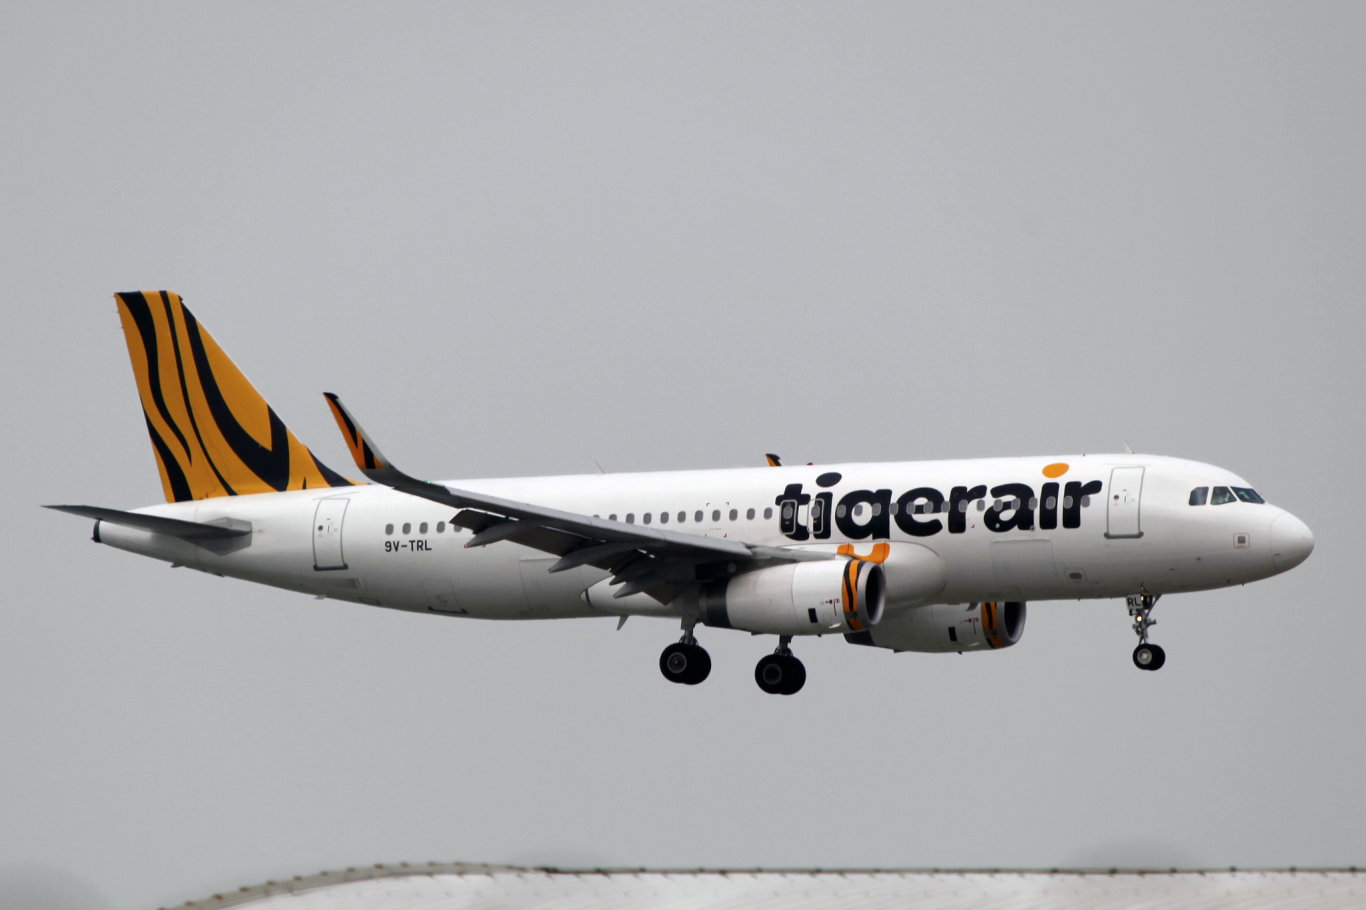 Tigerair Is Now Offering Regular Discounted Airfares Every Saturday